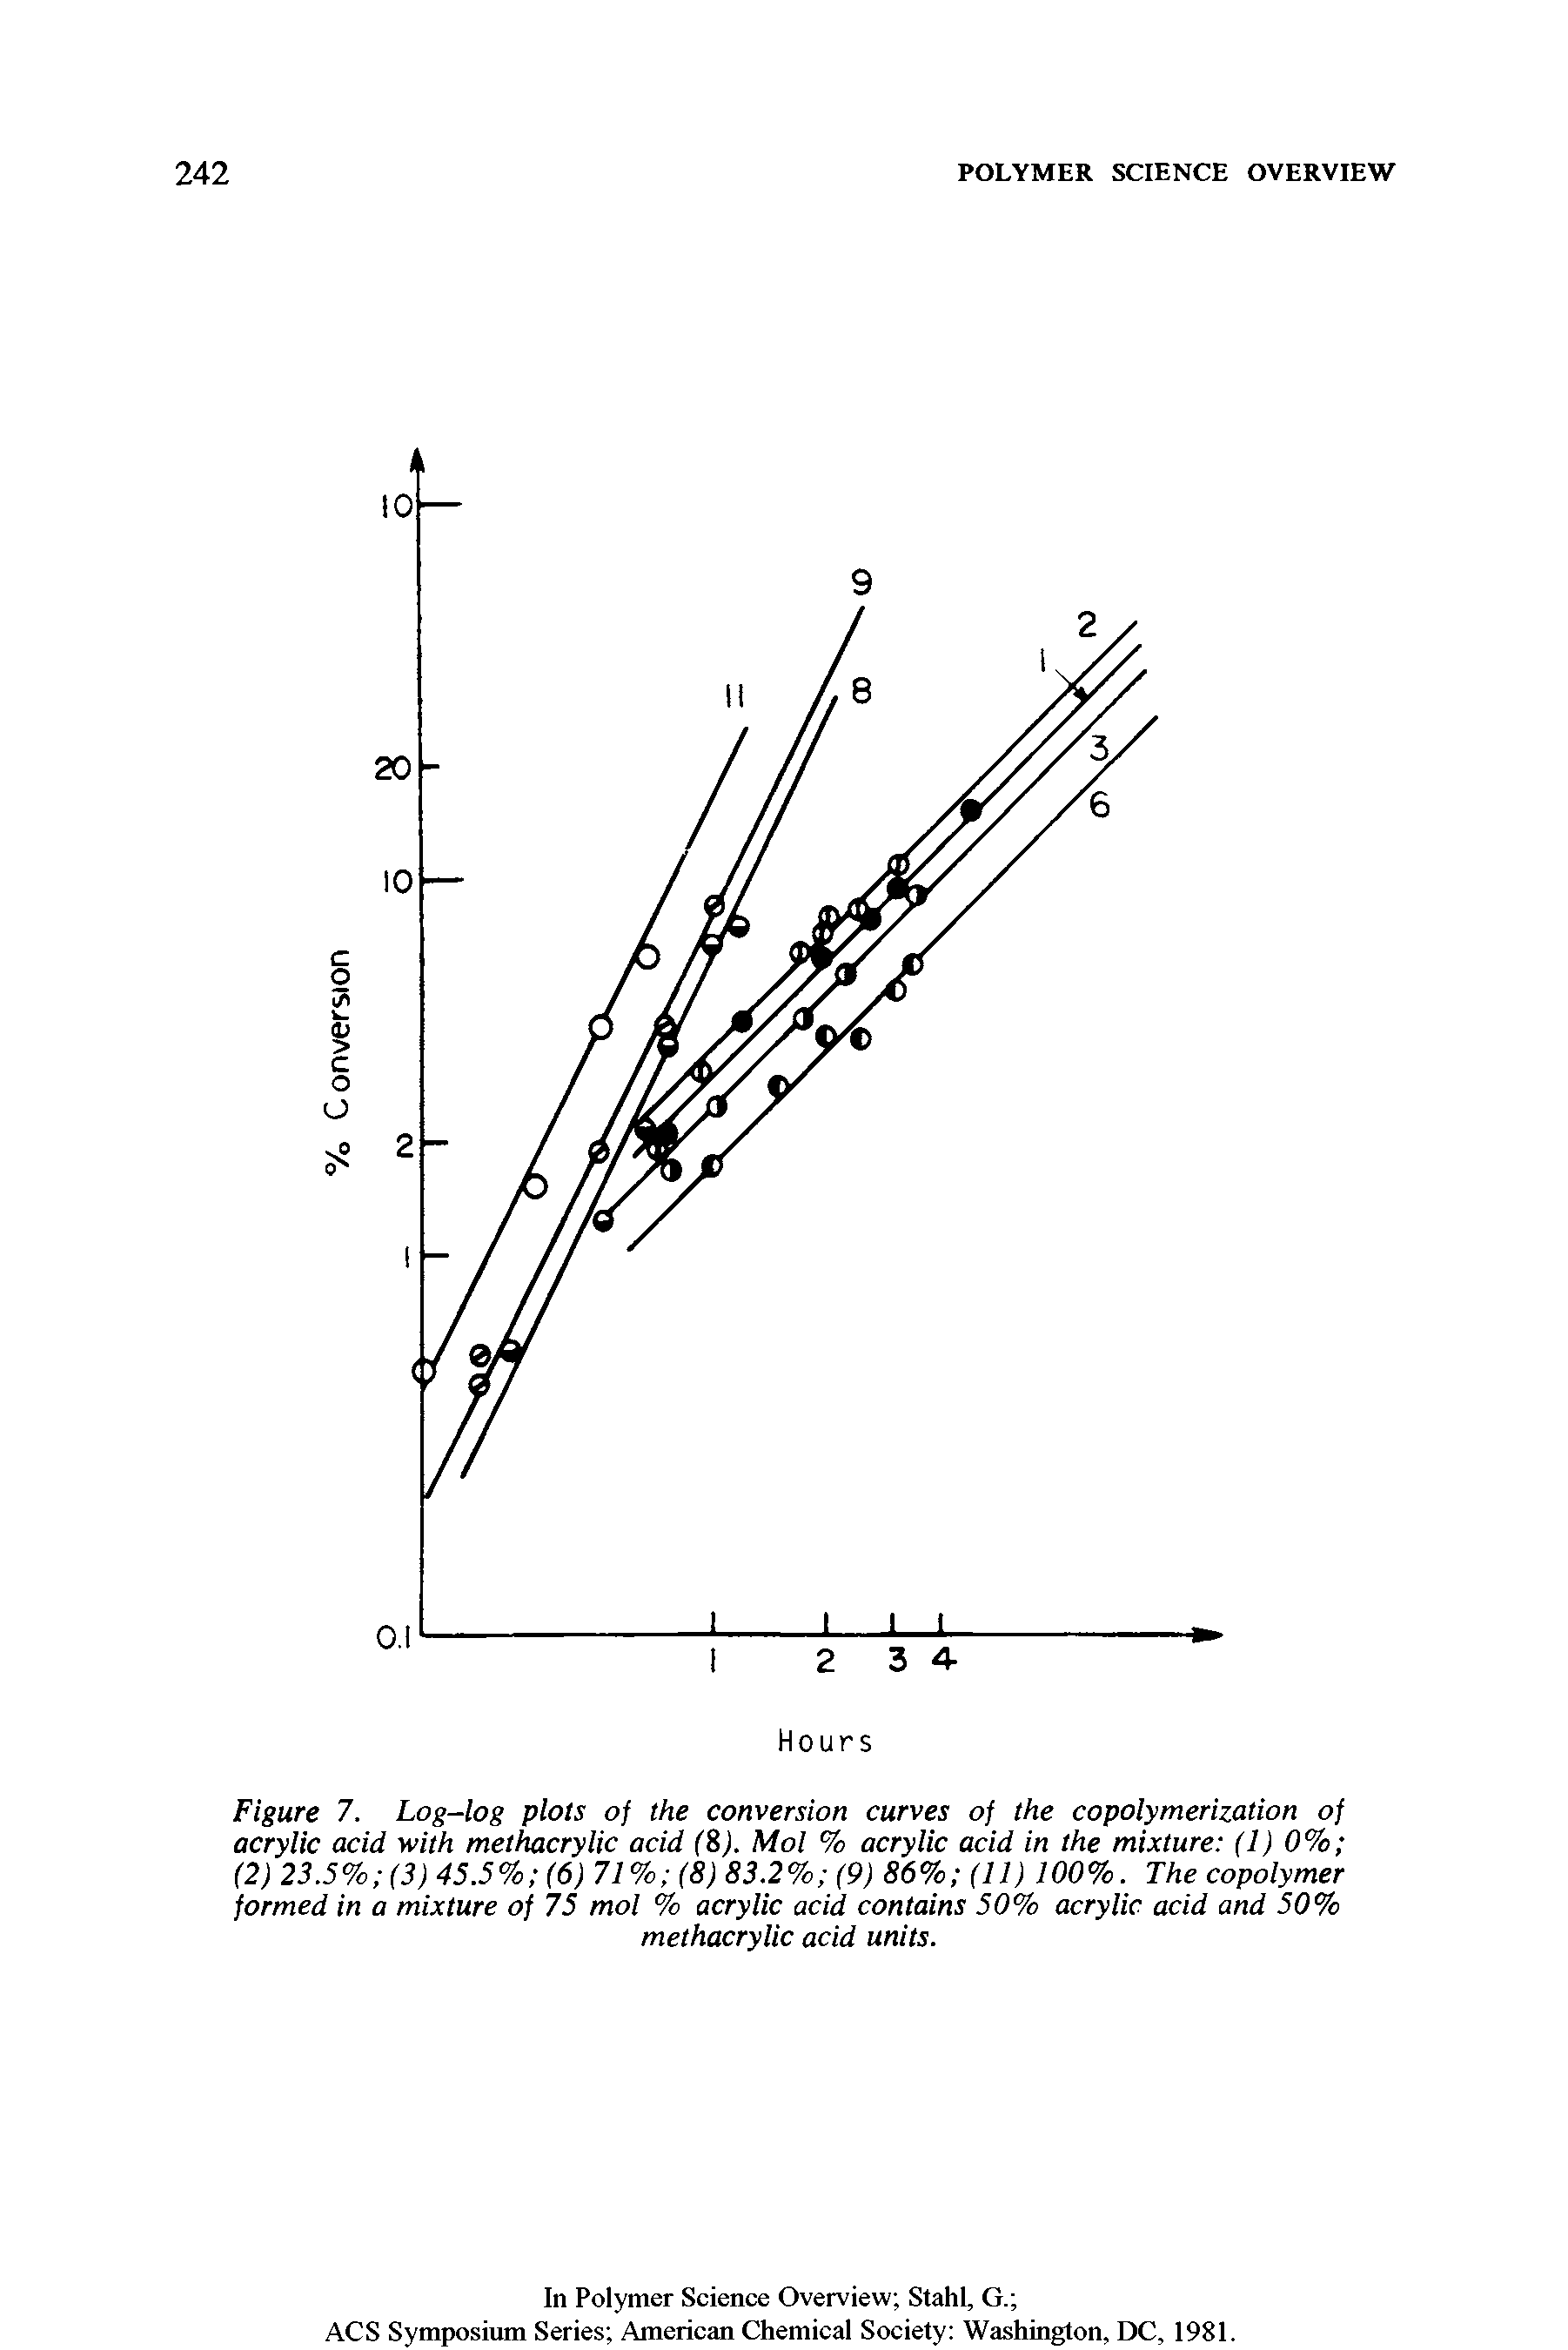 Figure 7. Log-log plots of the conversion curves of the copolymerization of acrylic acid with methacrylic acid (. Mol % acrylic acid in the mixture (1) 0% (2) 23.5% (3) 45.5% (6) 71% (8) 83.2% (9) 86% (11) 100%. The copolymer formed in a mixture of 75 mol % acrylic acid contains 50% acrylic acid and 50%...